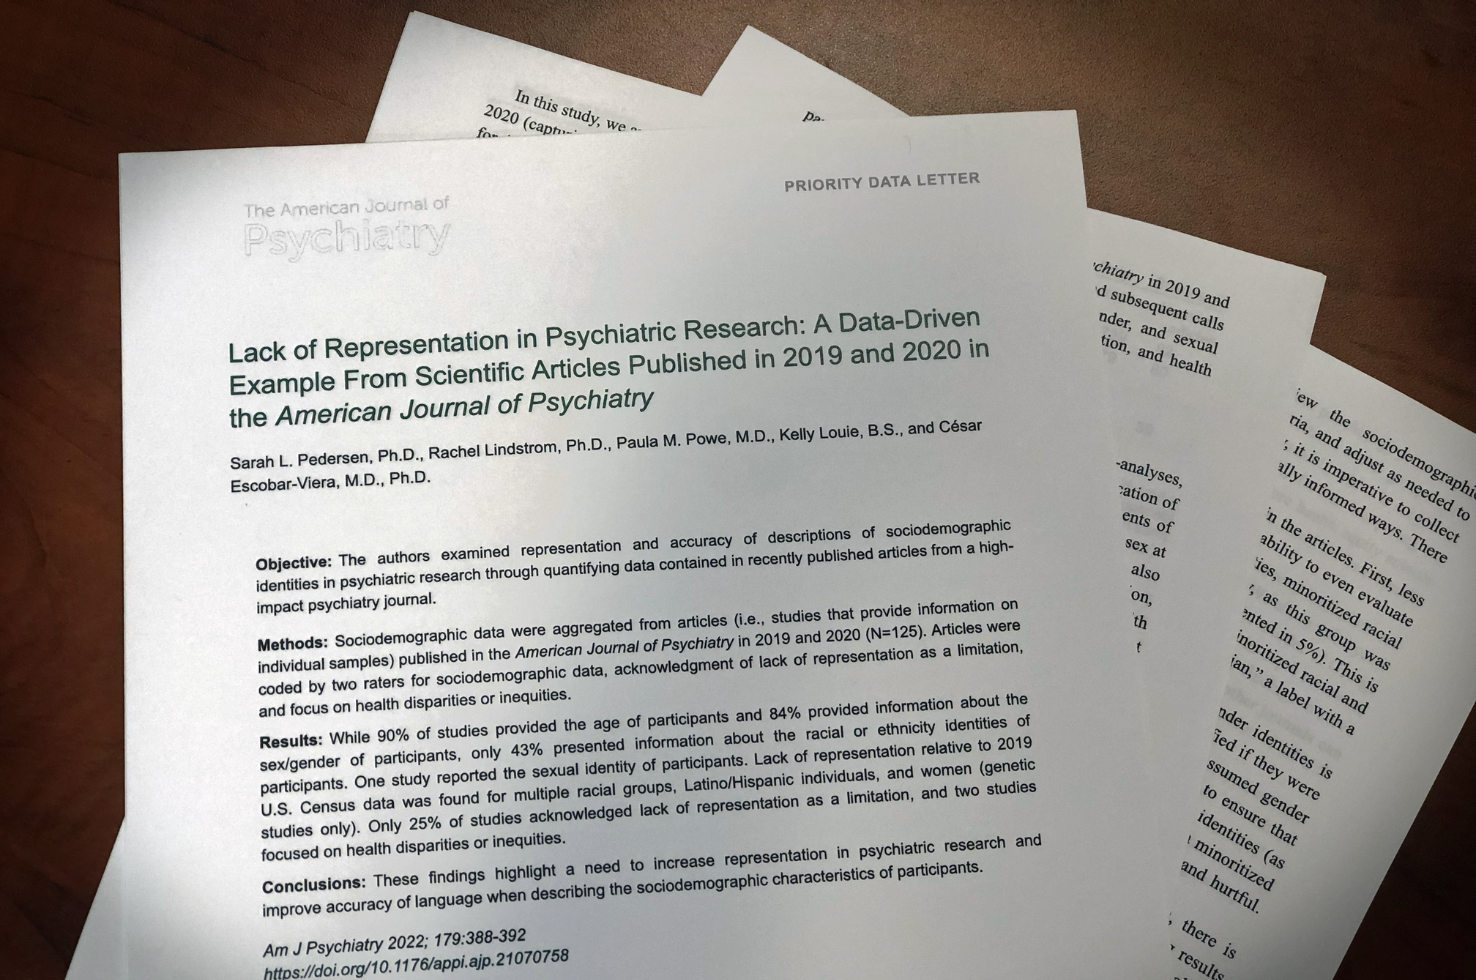 American Journal of Psychiatry: Evidence of Lack of Representation in Psychiatric Research